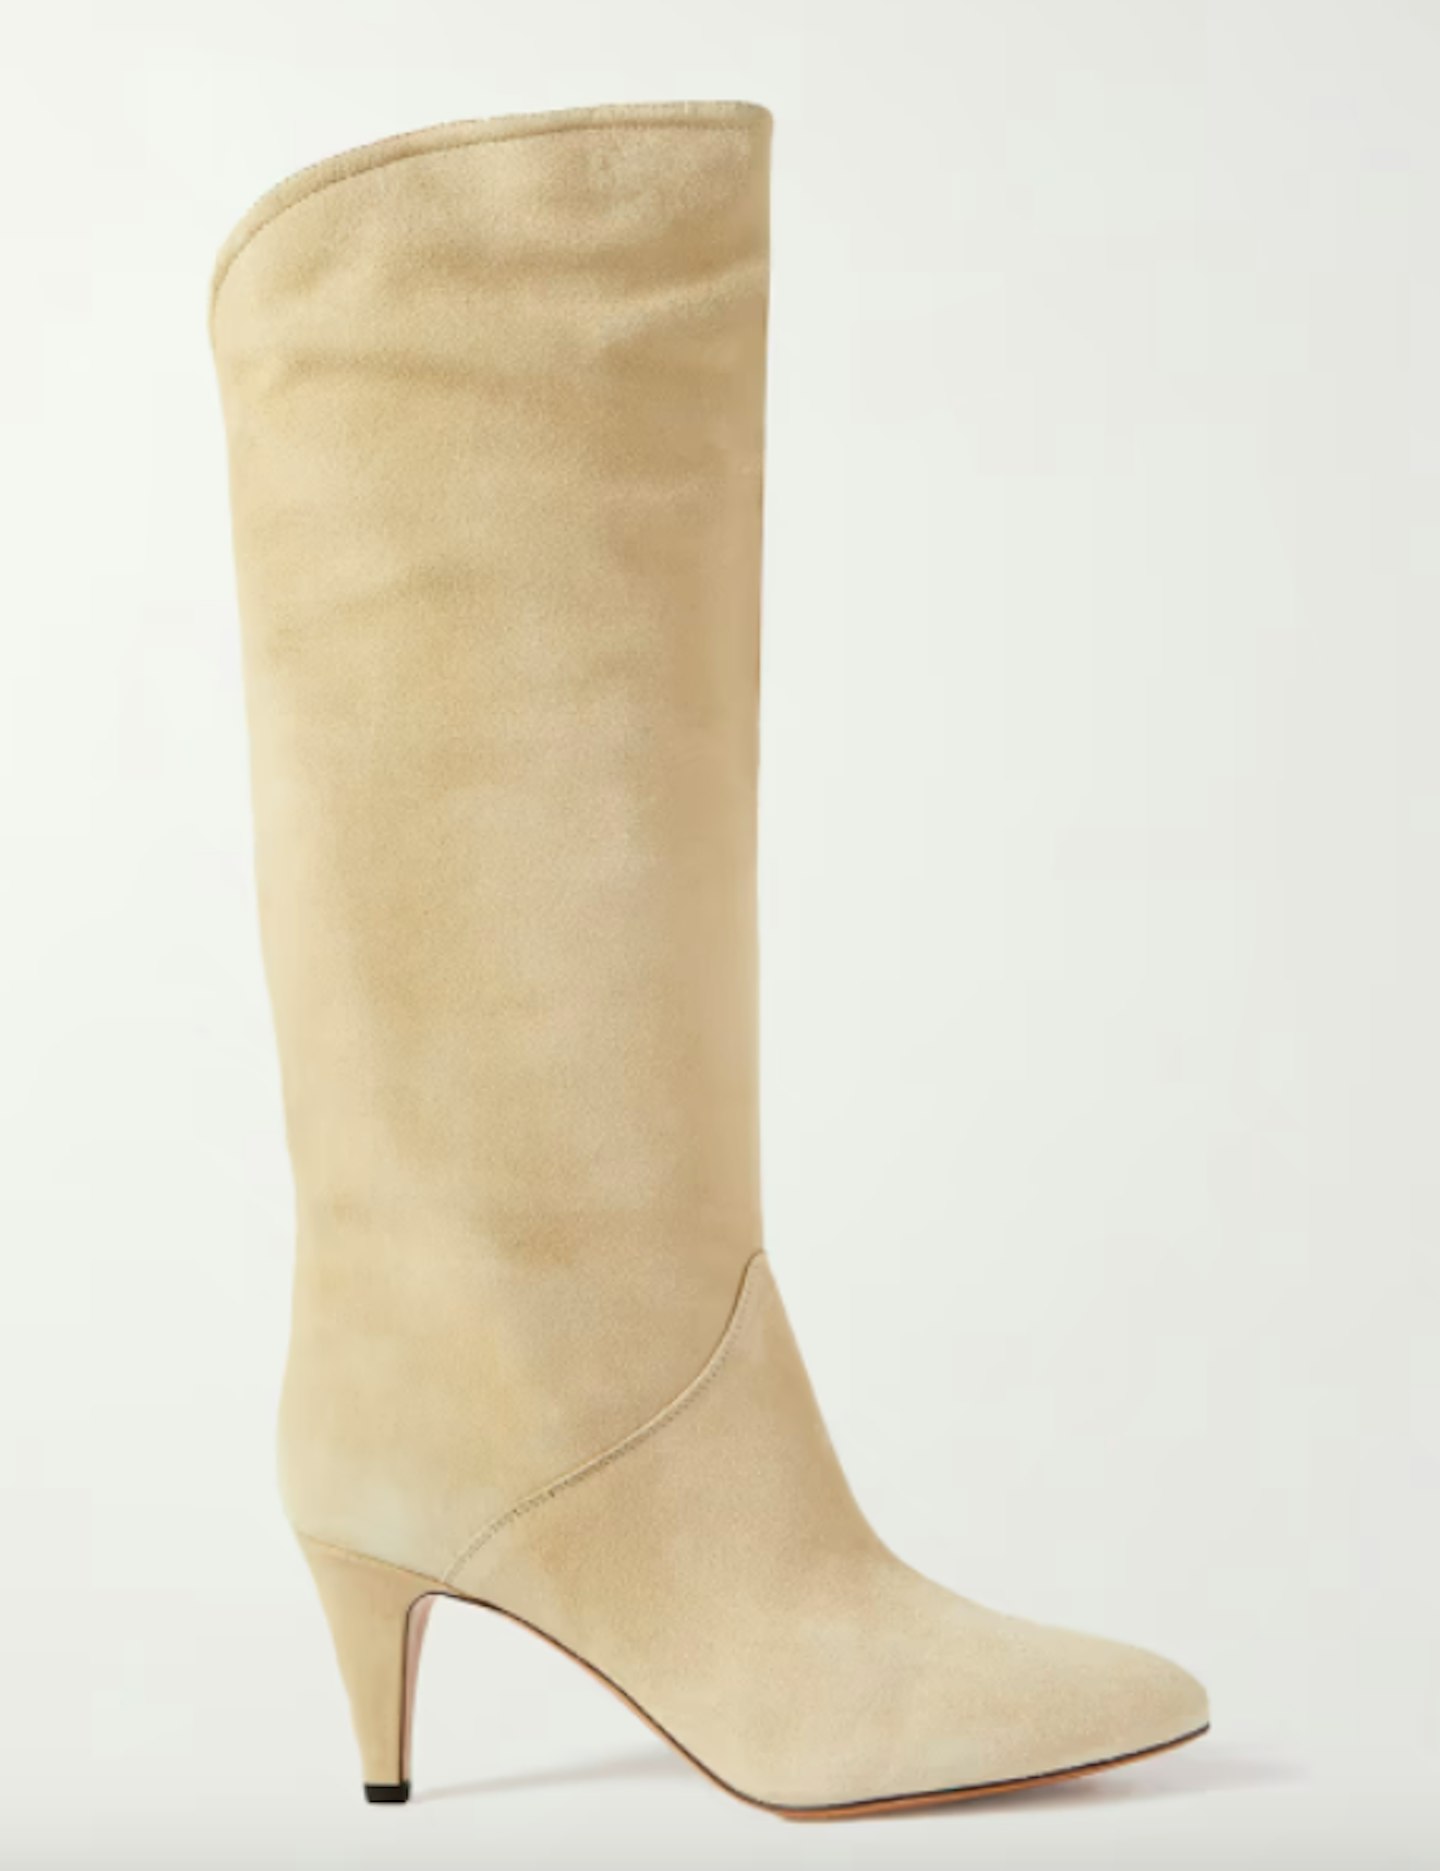 Isabel Marant, Laylis 75 Suede Knee Boots, £815